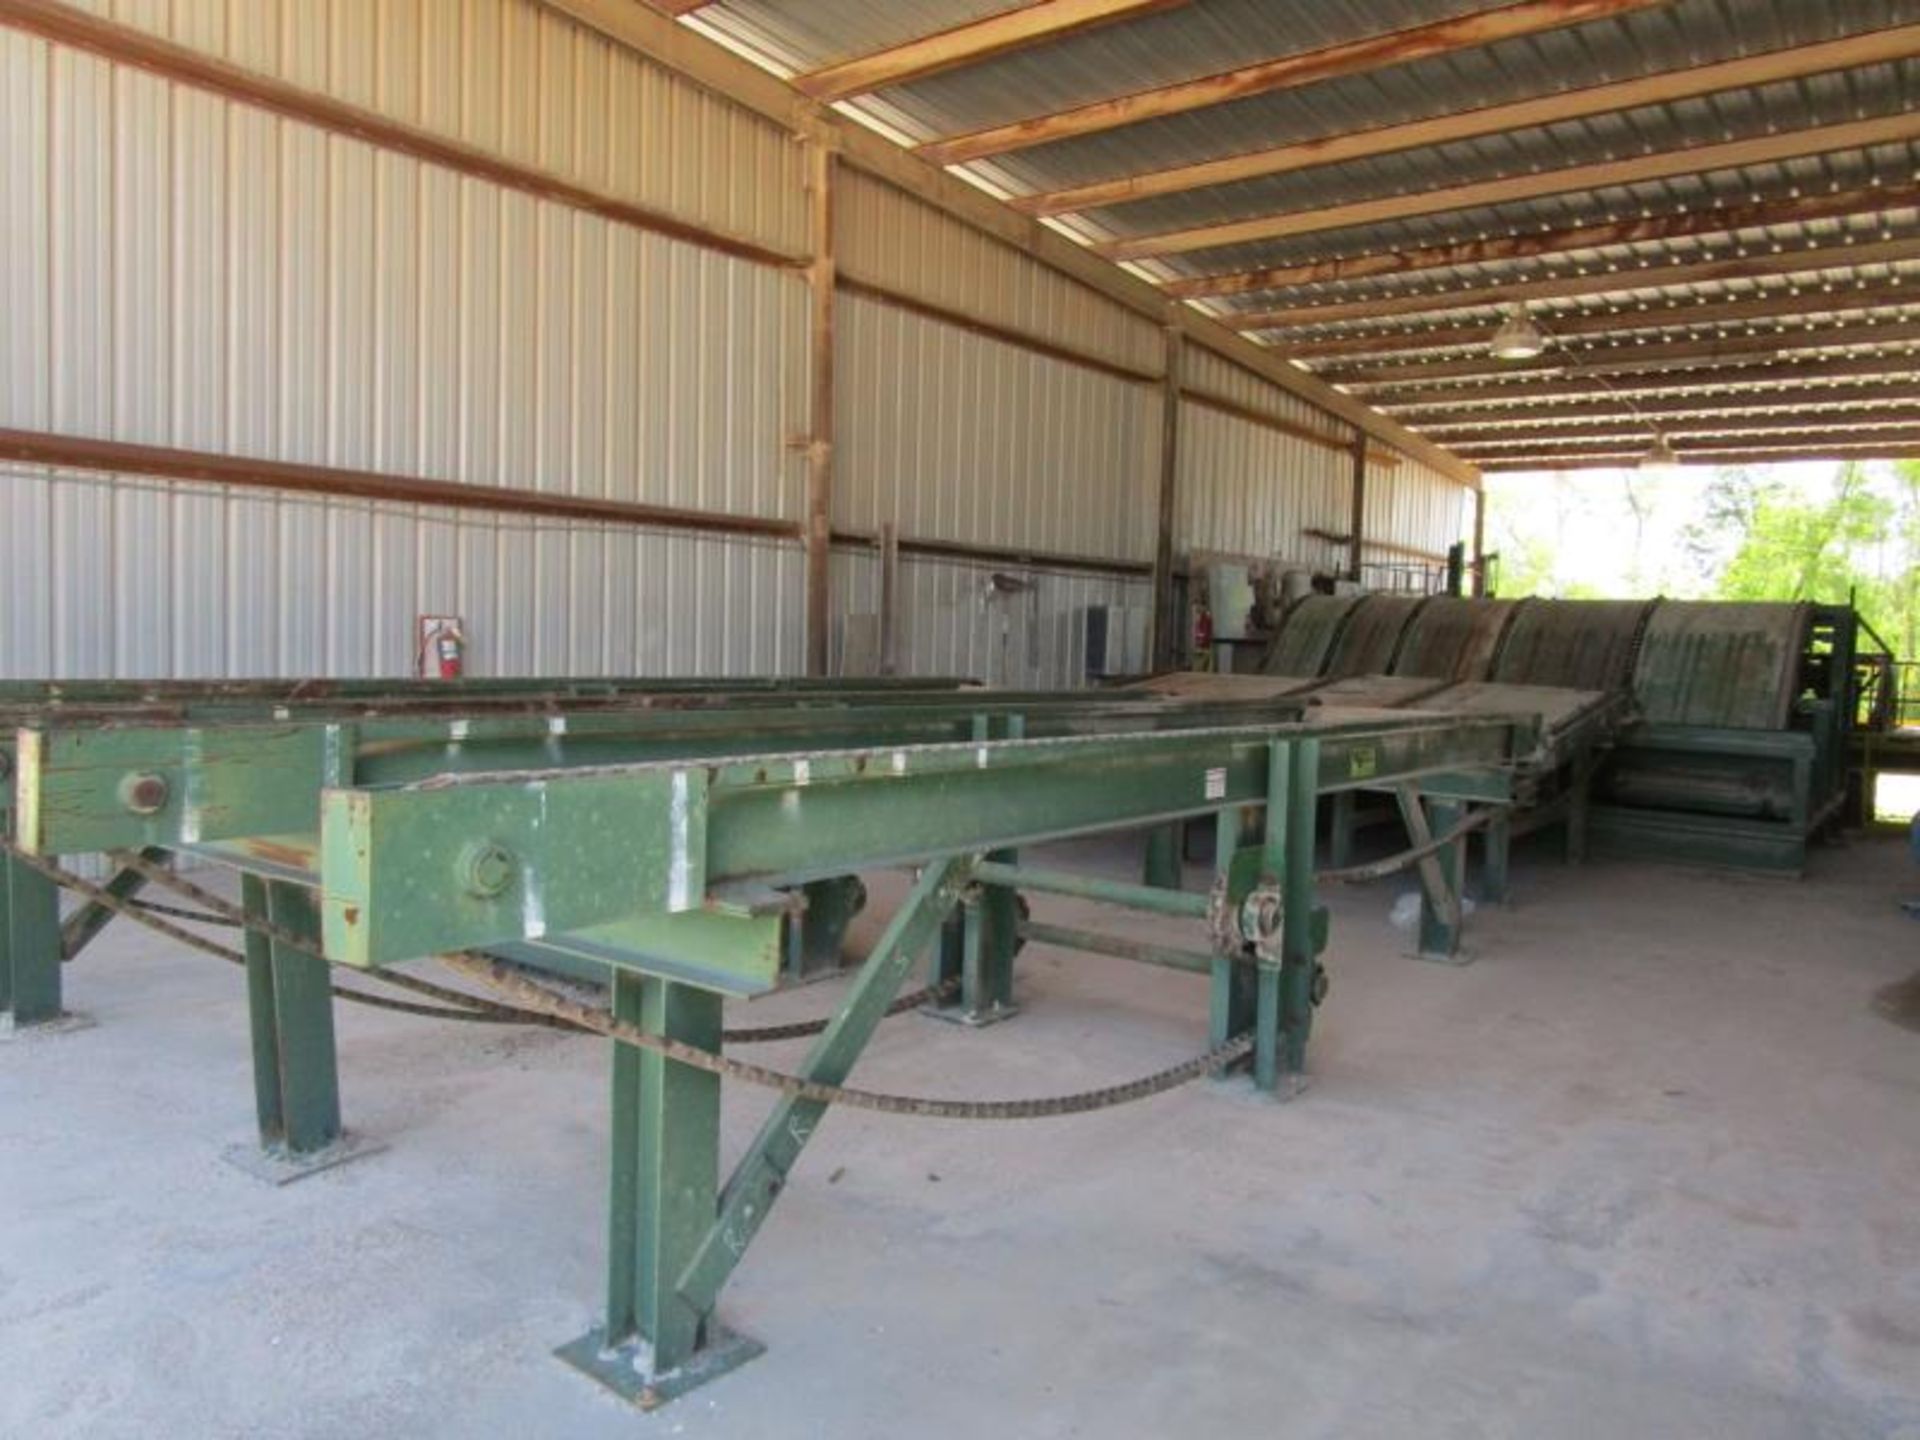 Board Chain Deck/ Stacker, 50,000 Board Feet/ per day with custom controller controls/ Automation,